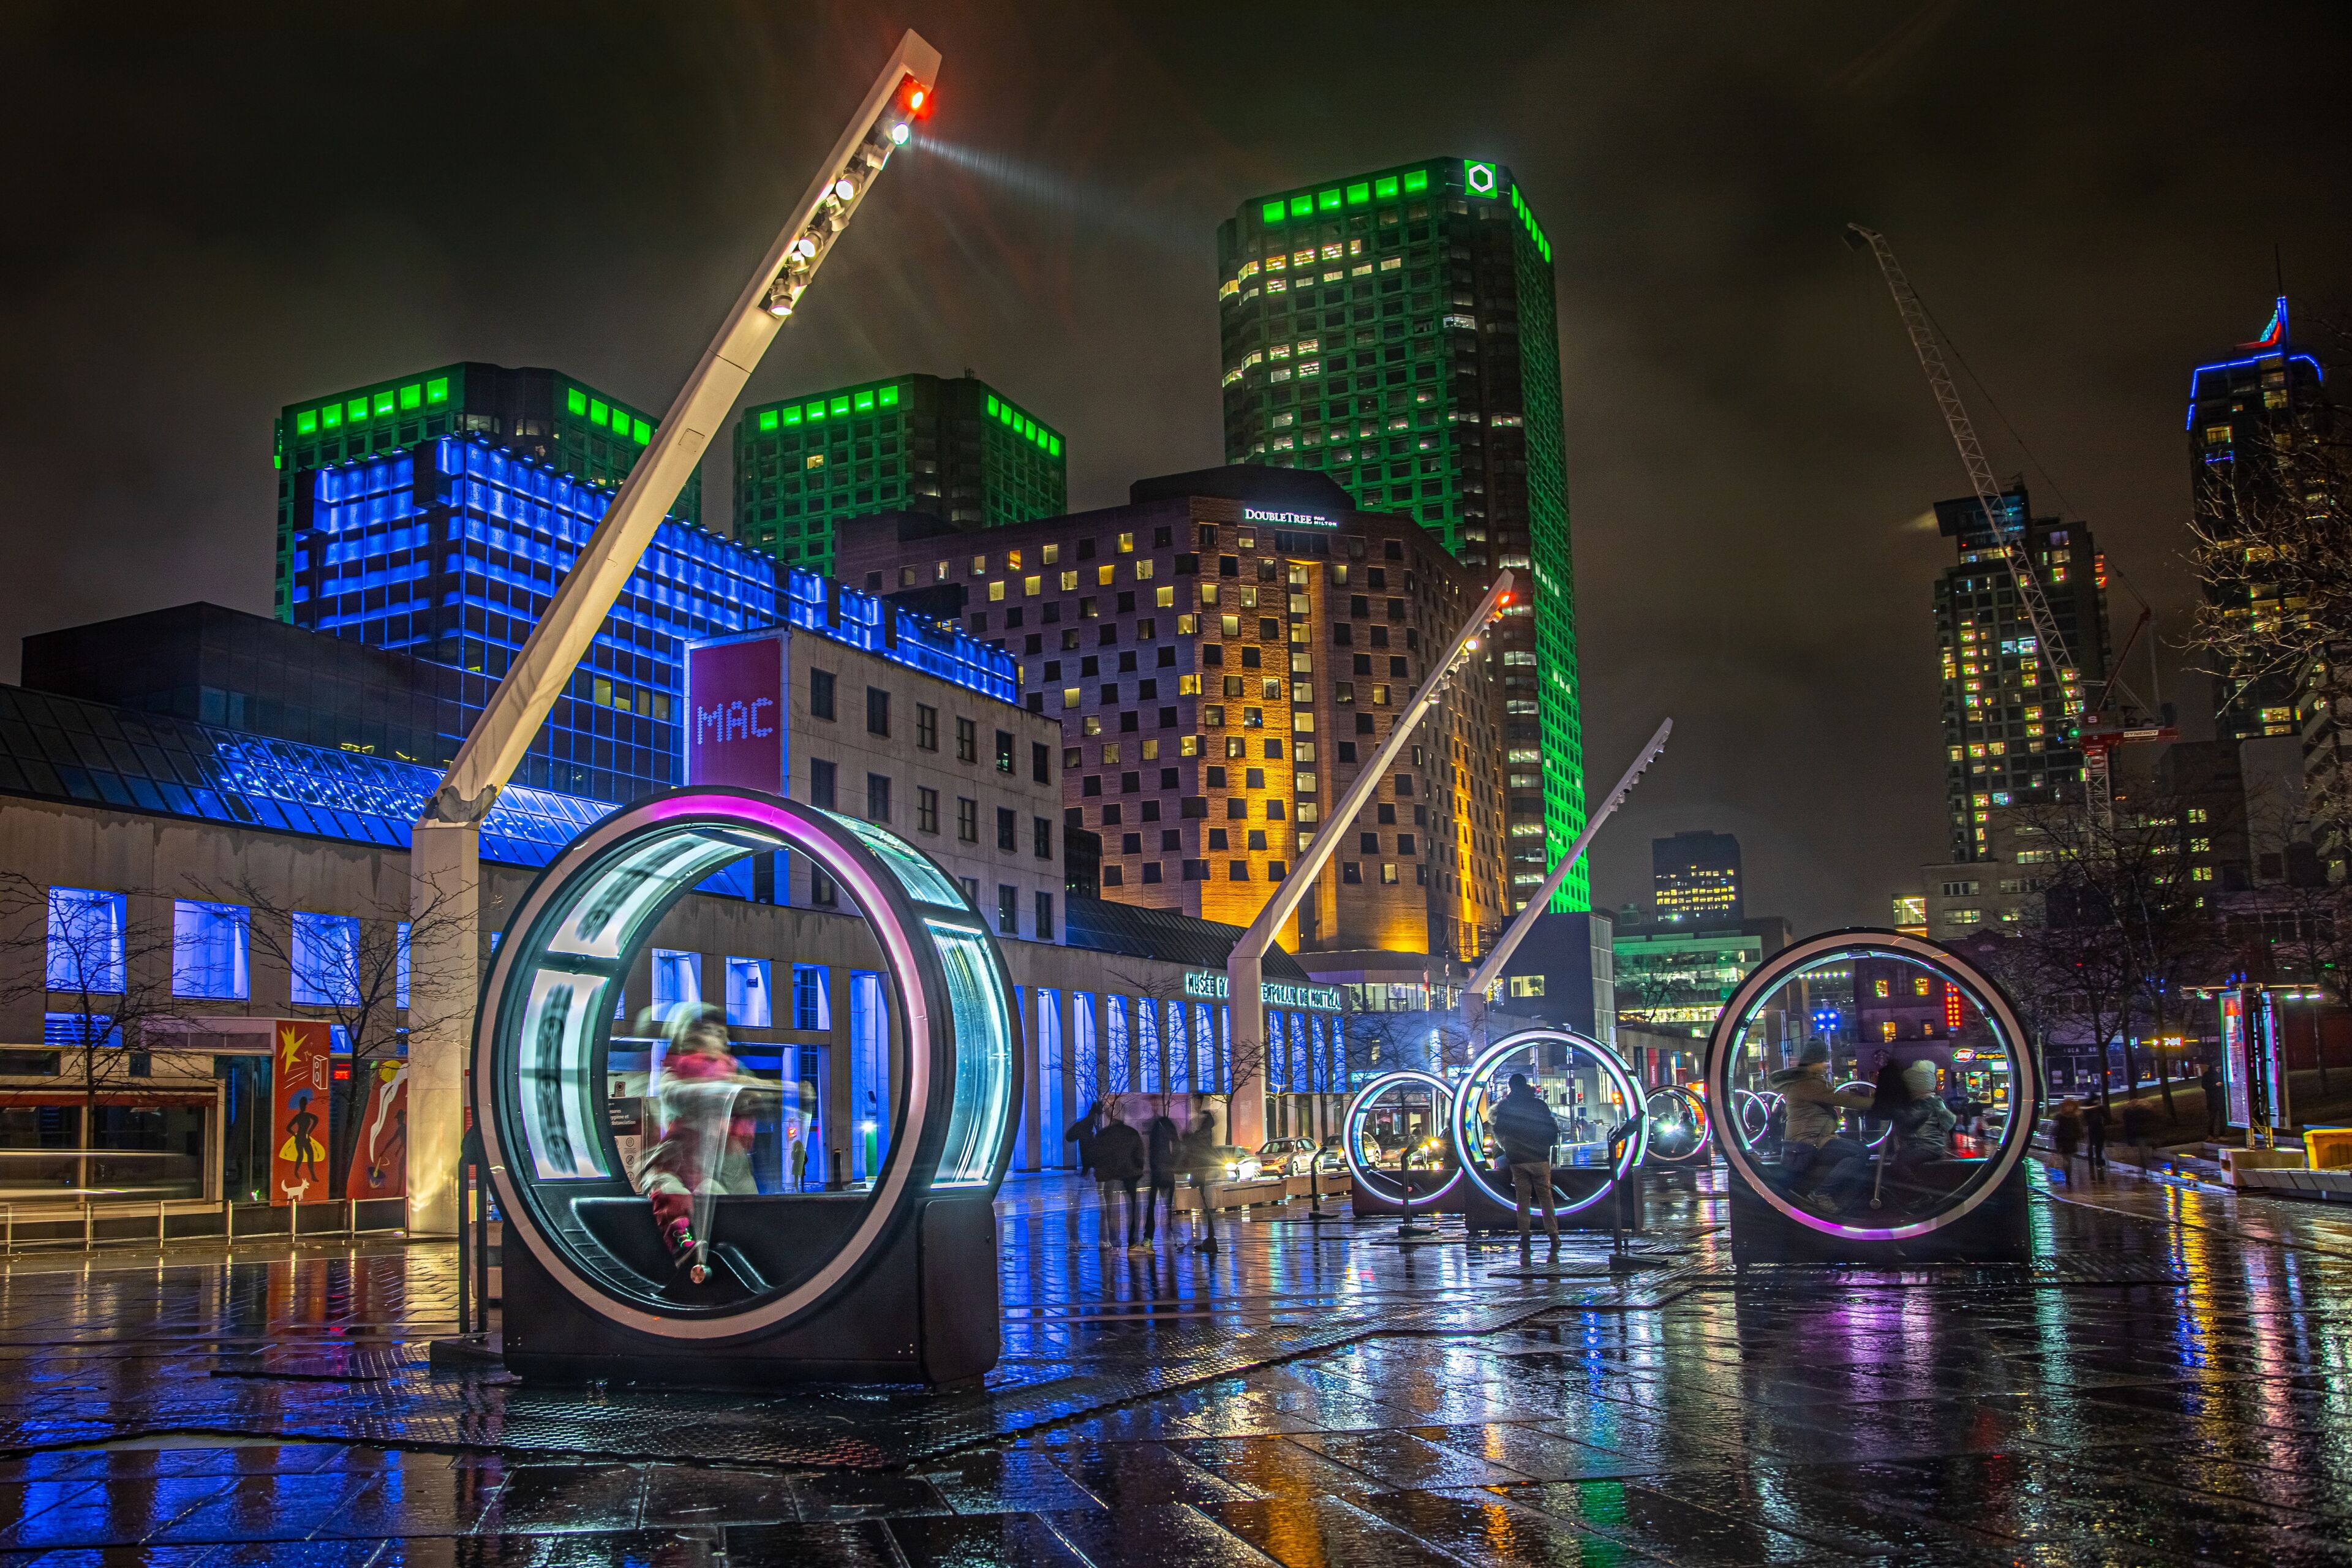 A vibrant cityscape at night featuring futuristic light installations with illuminated circular pods that people can walk through, set against a backdrop of brightly lit skyscrapers.